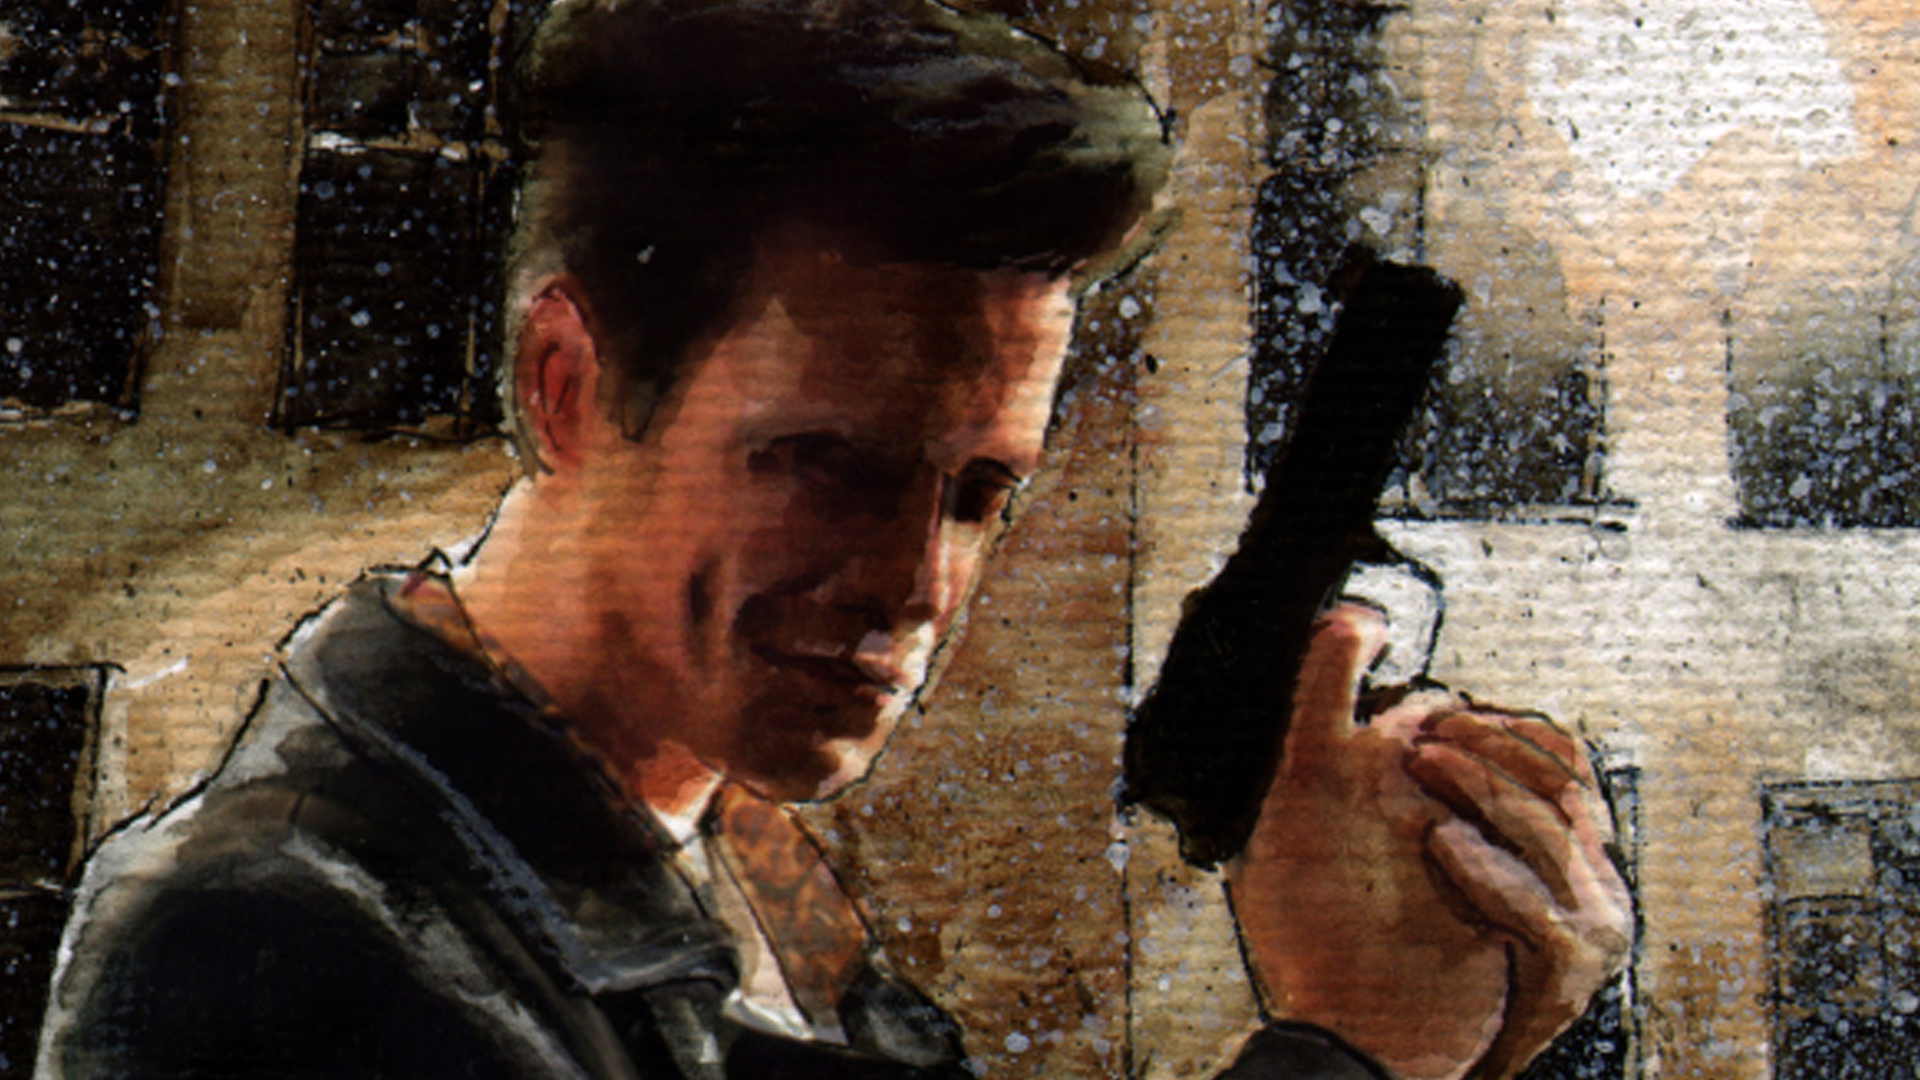 max payne 4 xbox one release date